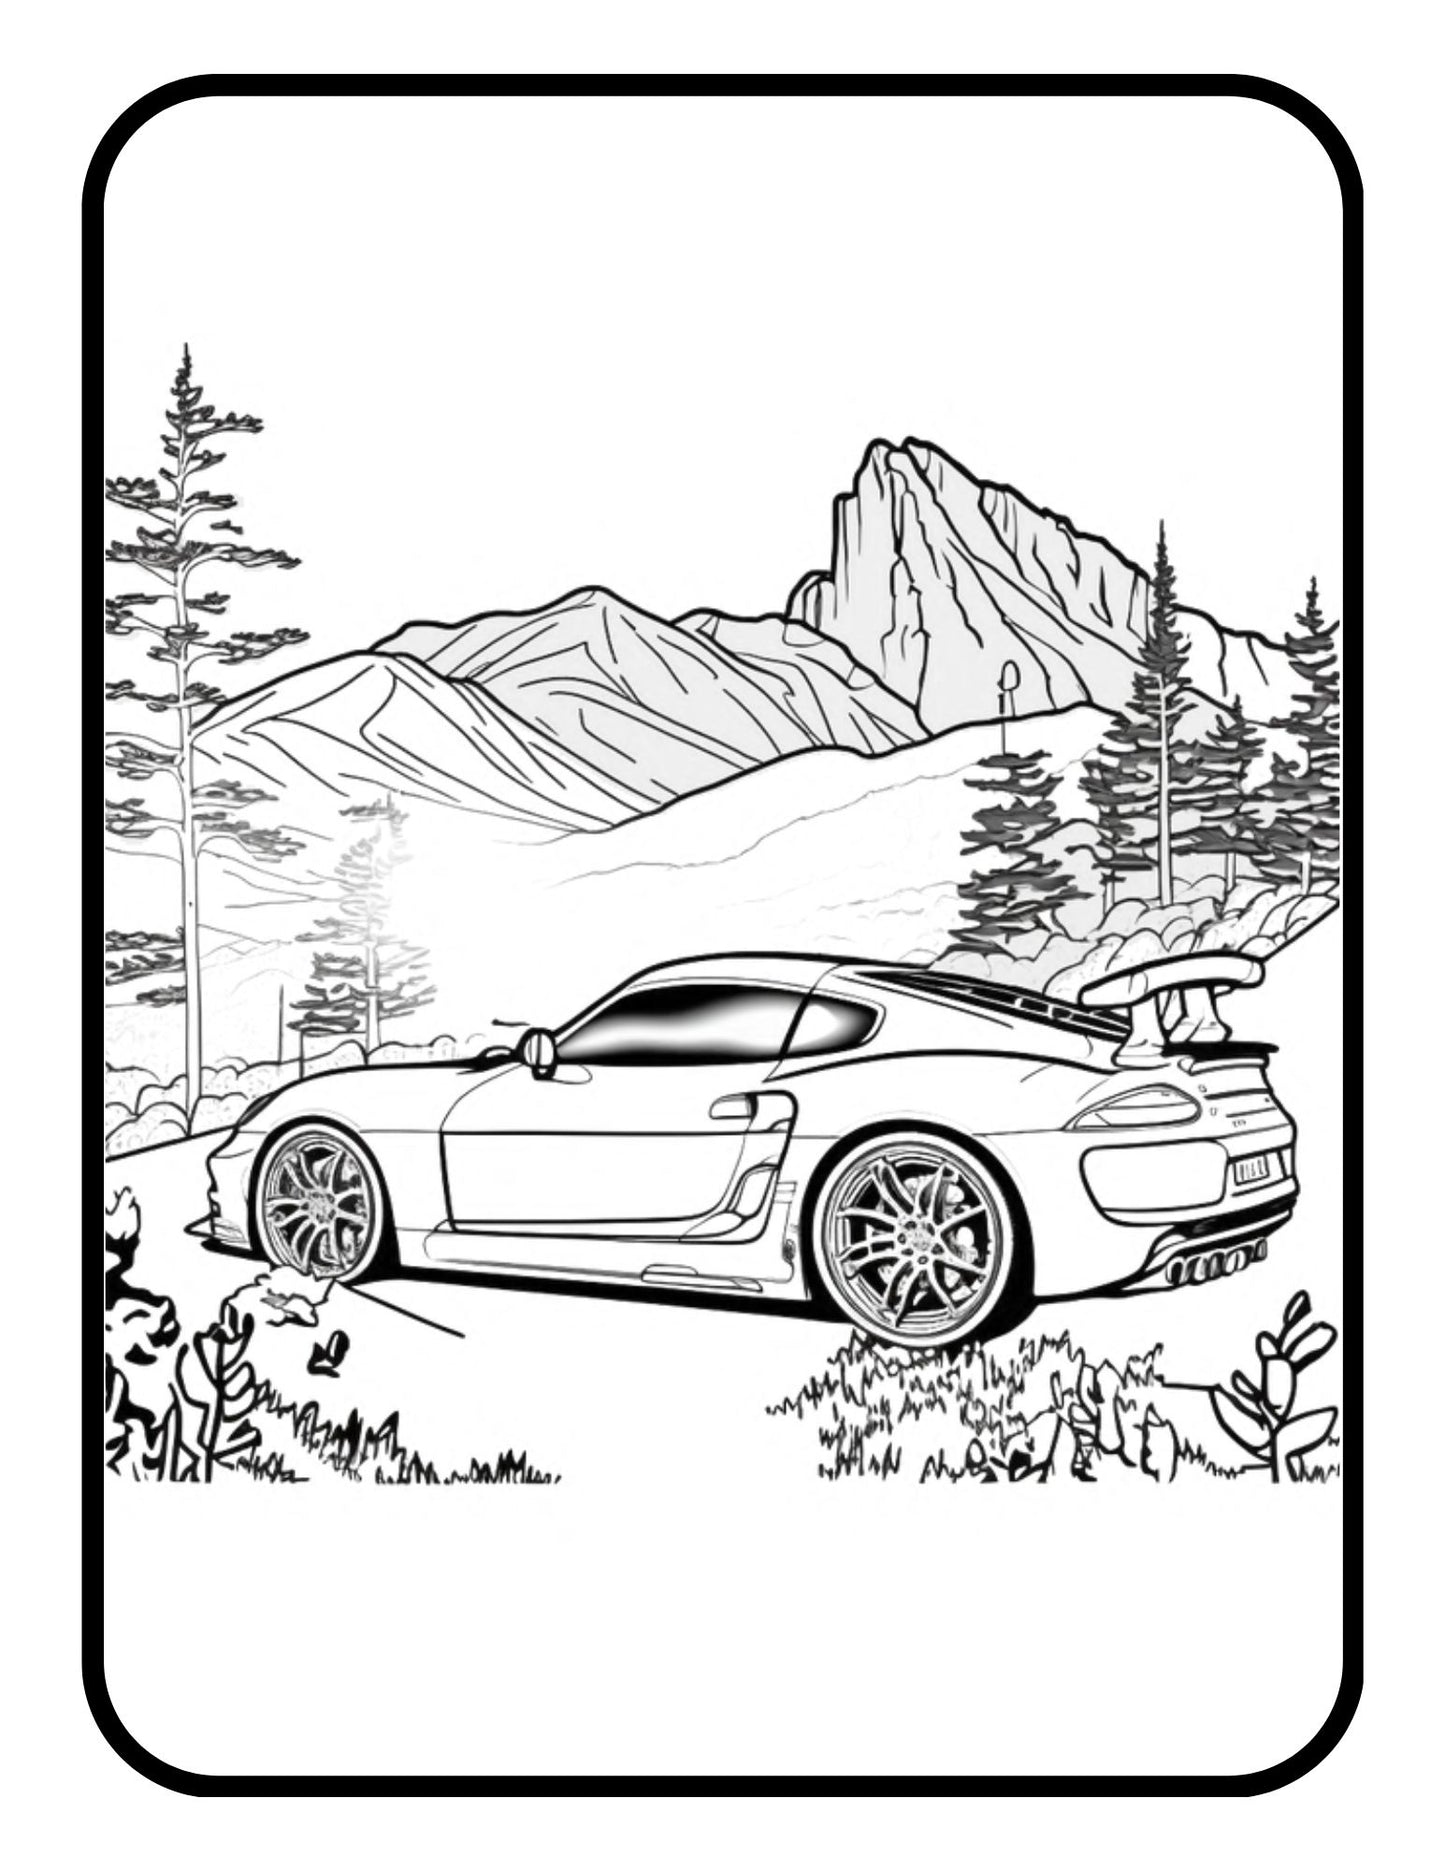 Exotic Luxury Cars Race Car Coloring Book Dream Luxury for Men Women Kids Boys Girls Teens 50 Vehicles Coloring Pages for Adults and Kids